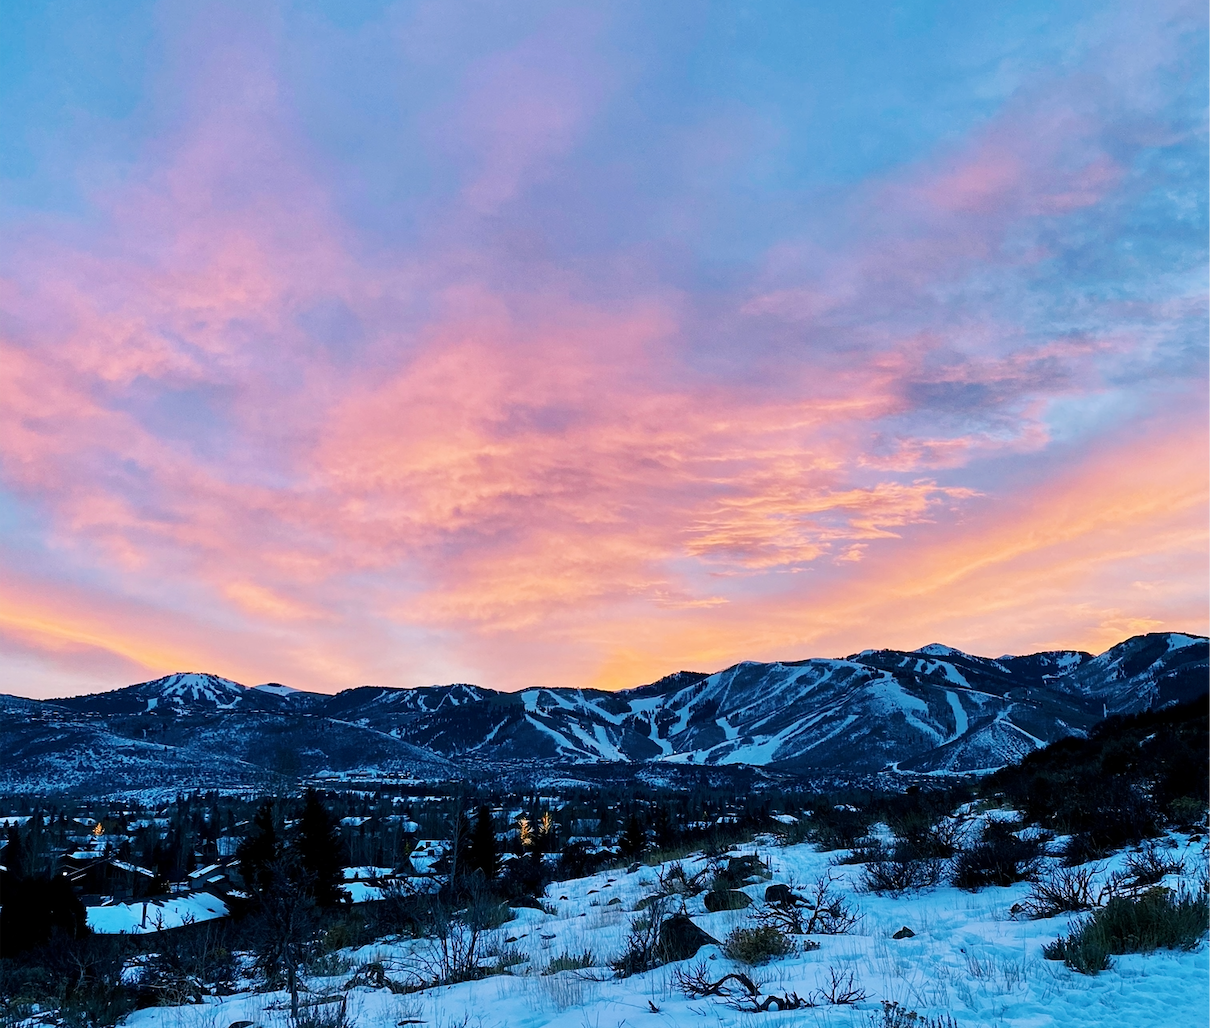 Image of a colorful sunset in park city utah. It is the best time for apres ski in Utah. Main Street has a ton of lively bars with live music and incredible apres ski scene. The night life in park city brings a ton of young people to the ski resort.